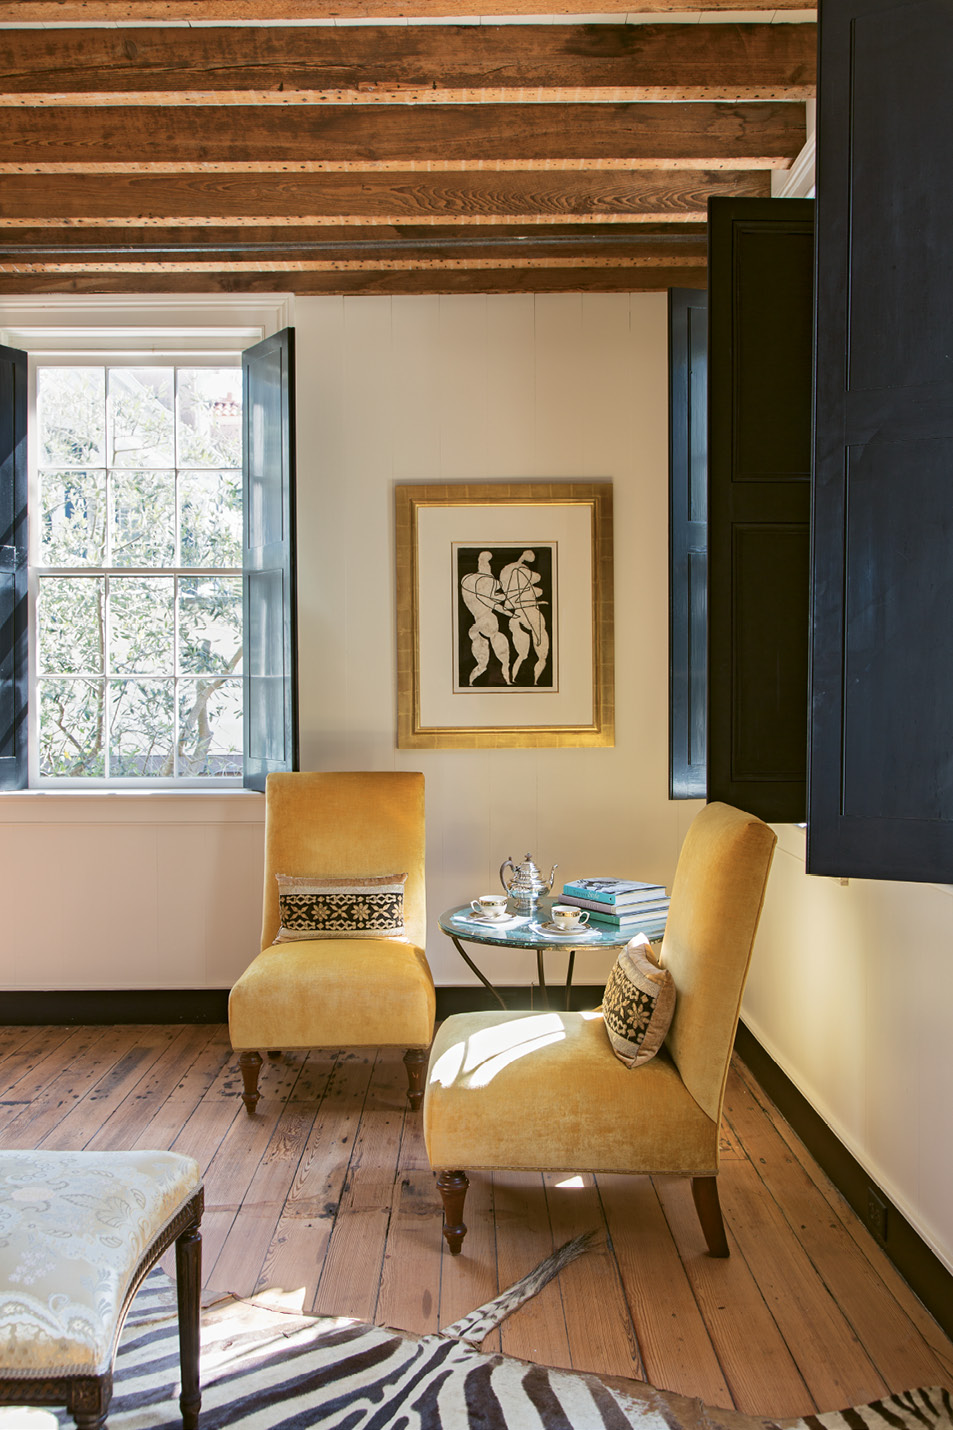 The guest quarters feature more breathtaking artworks, such as Otto Neumann monotypes.